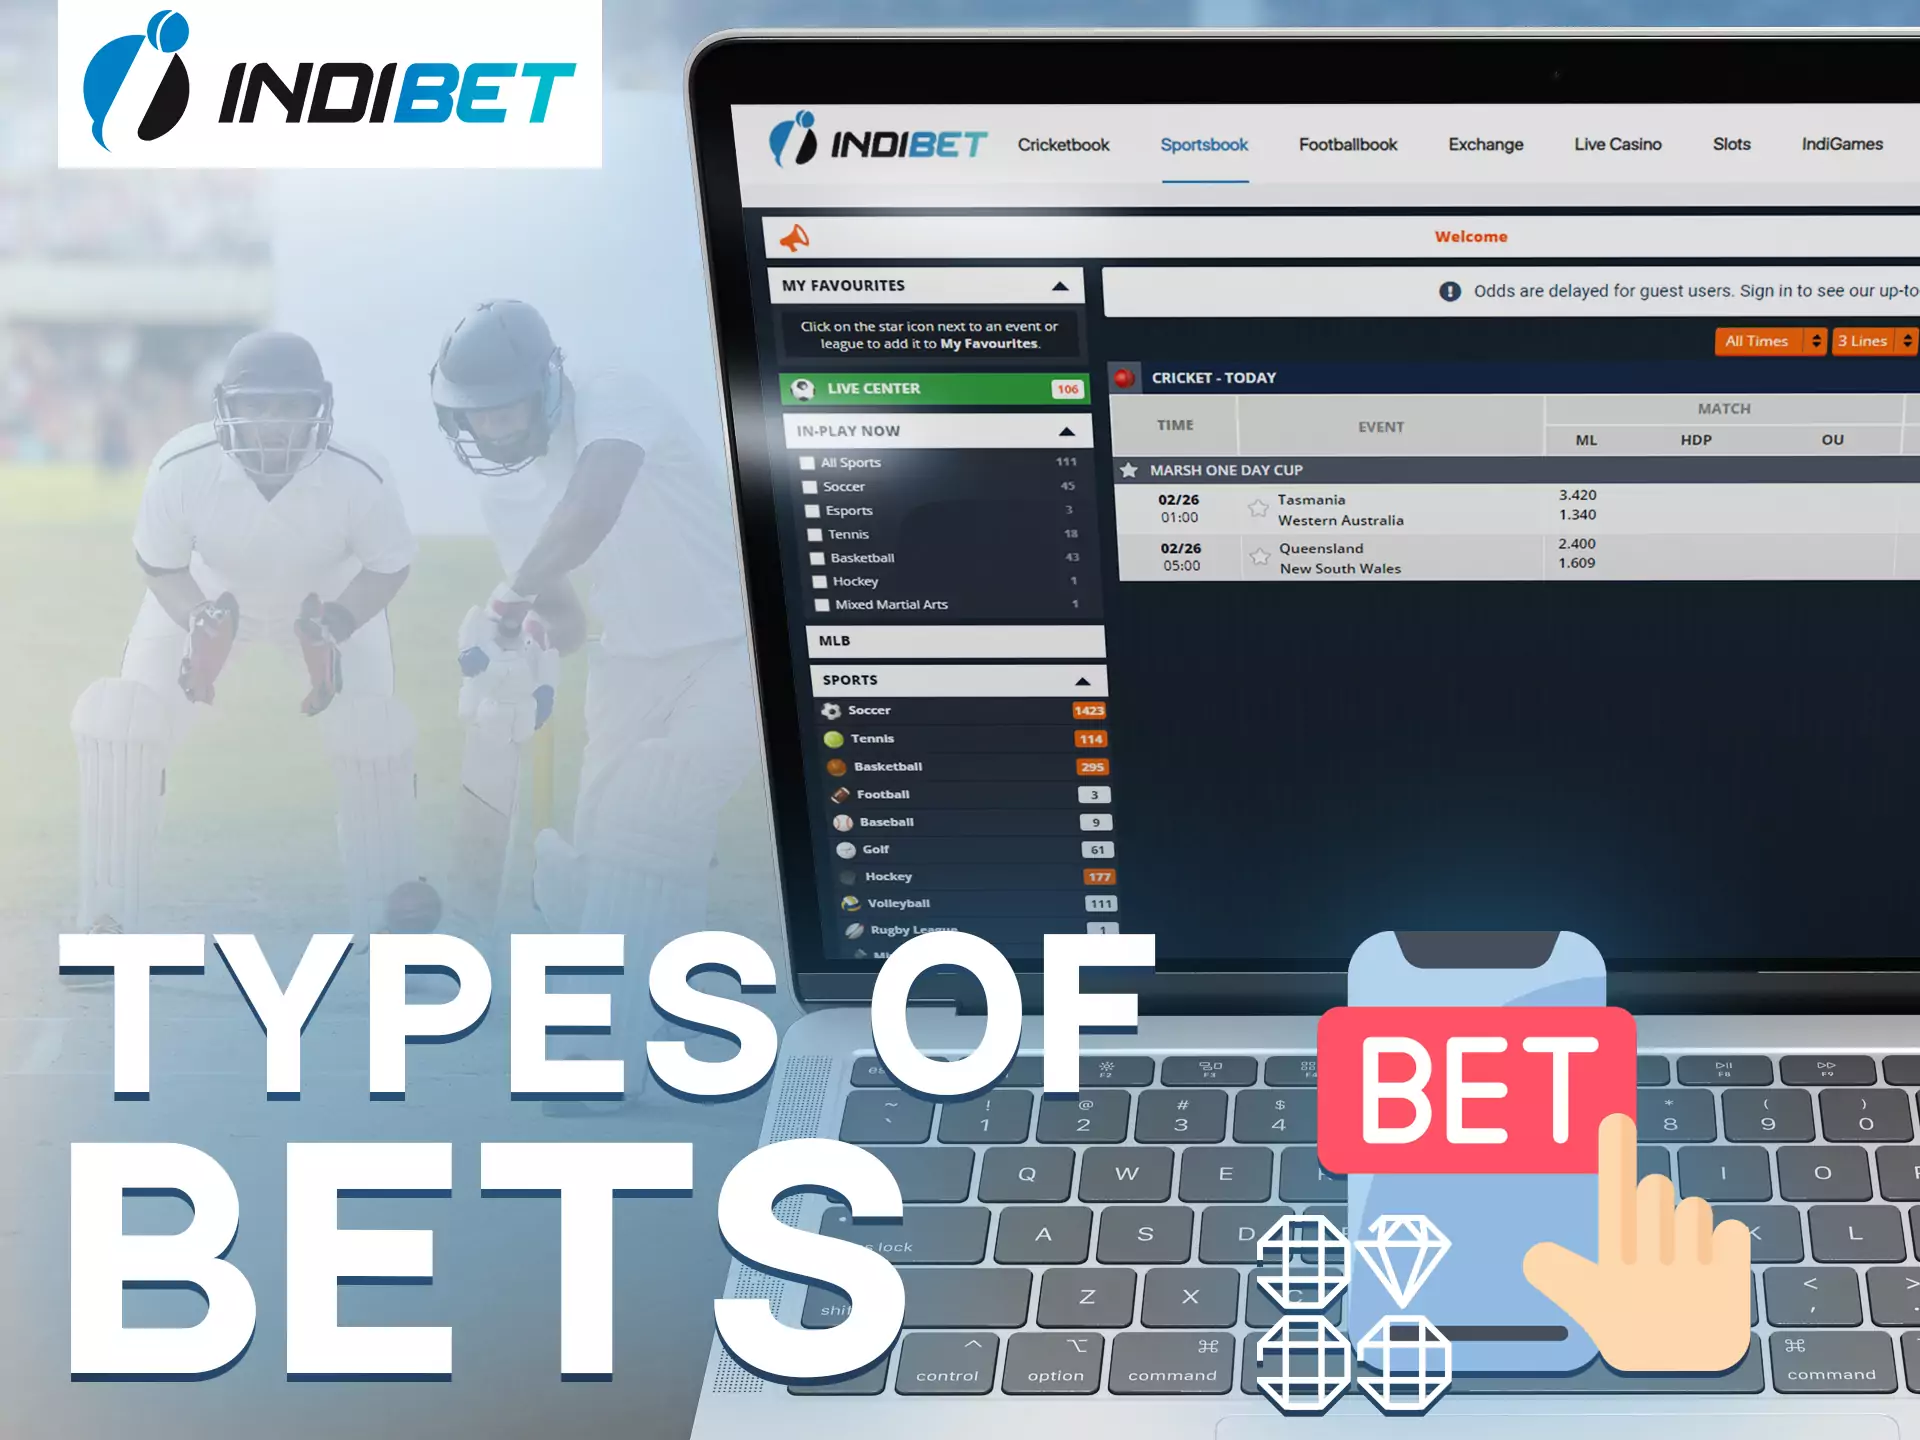 At Indibet, try different types of bets when you bet on sports.